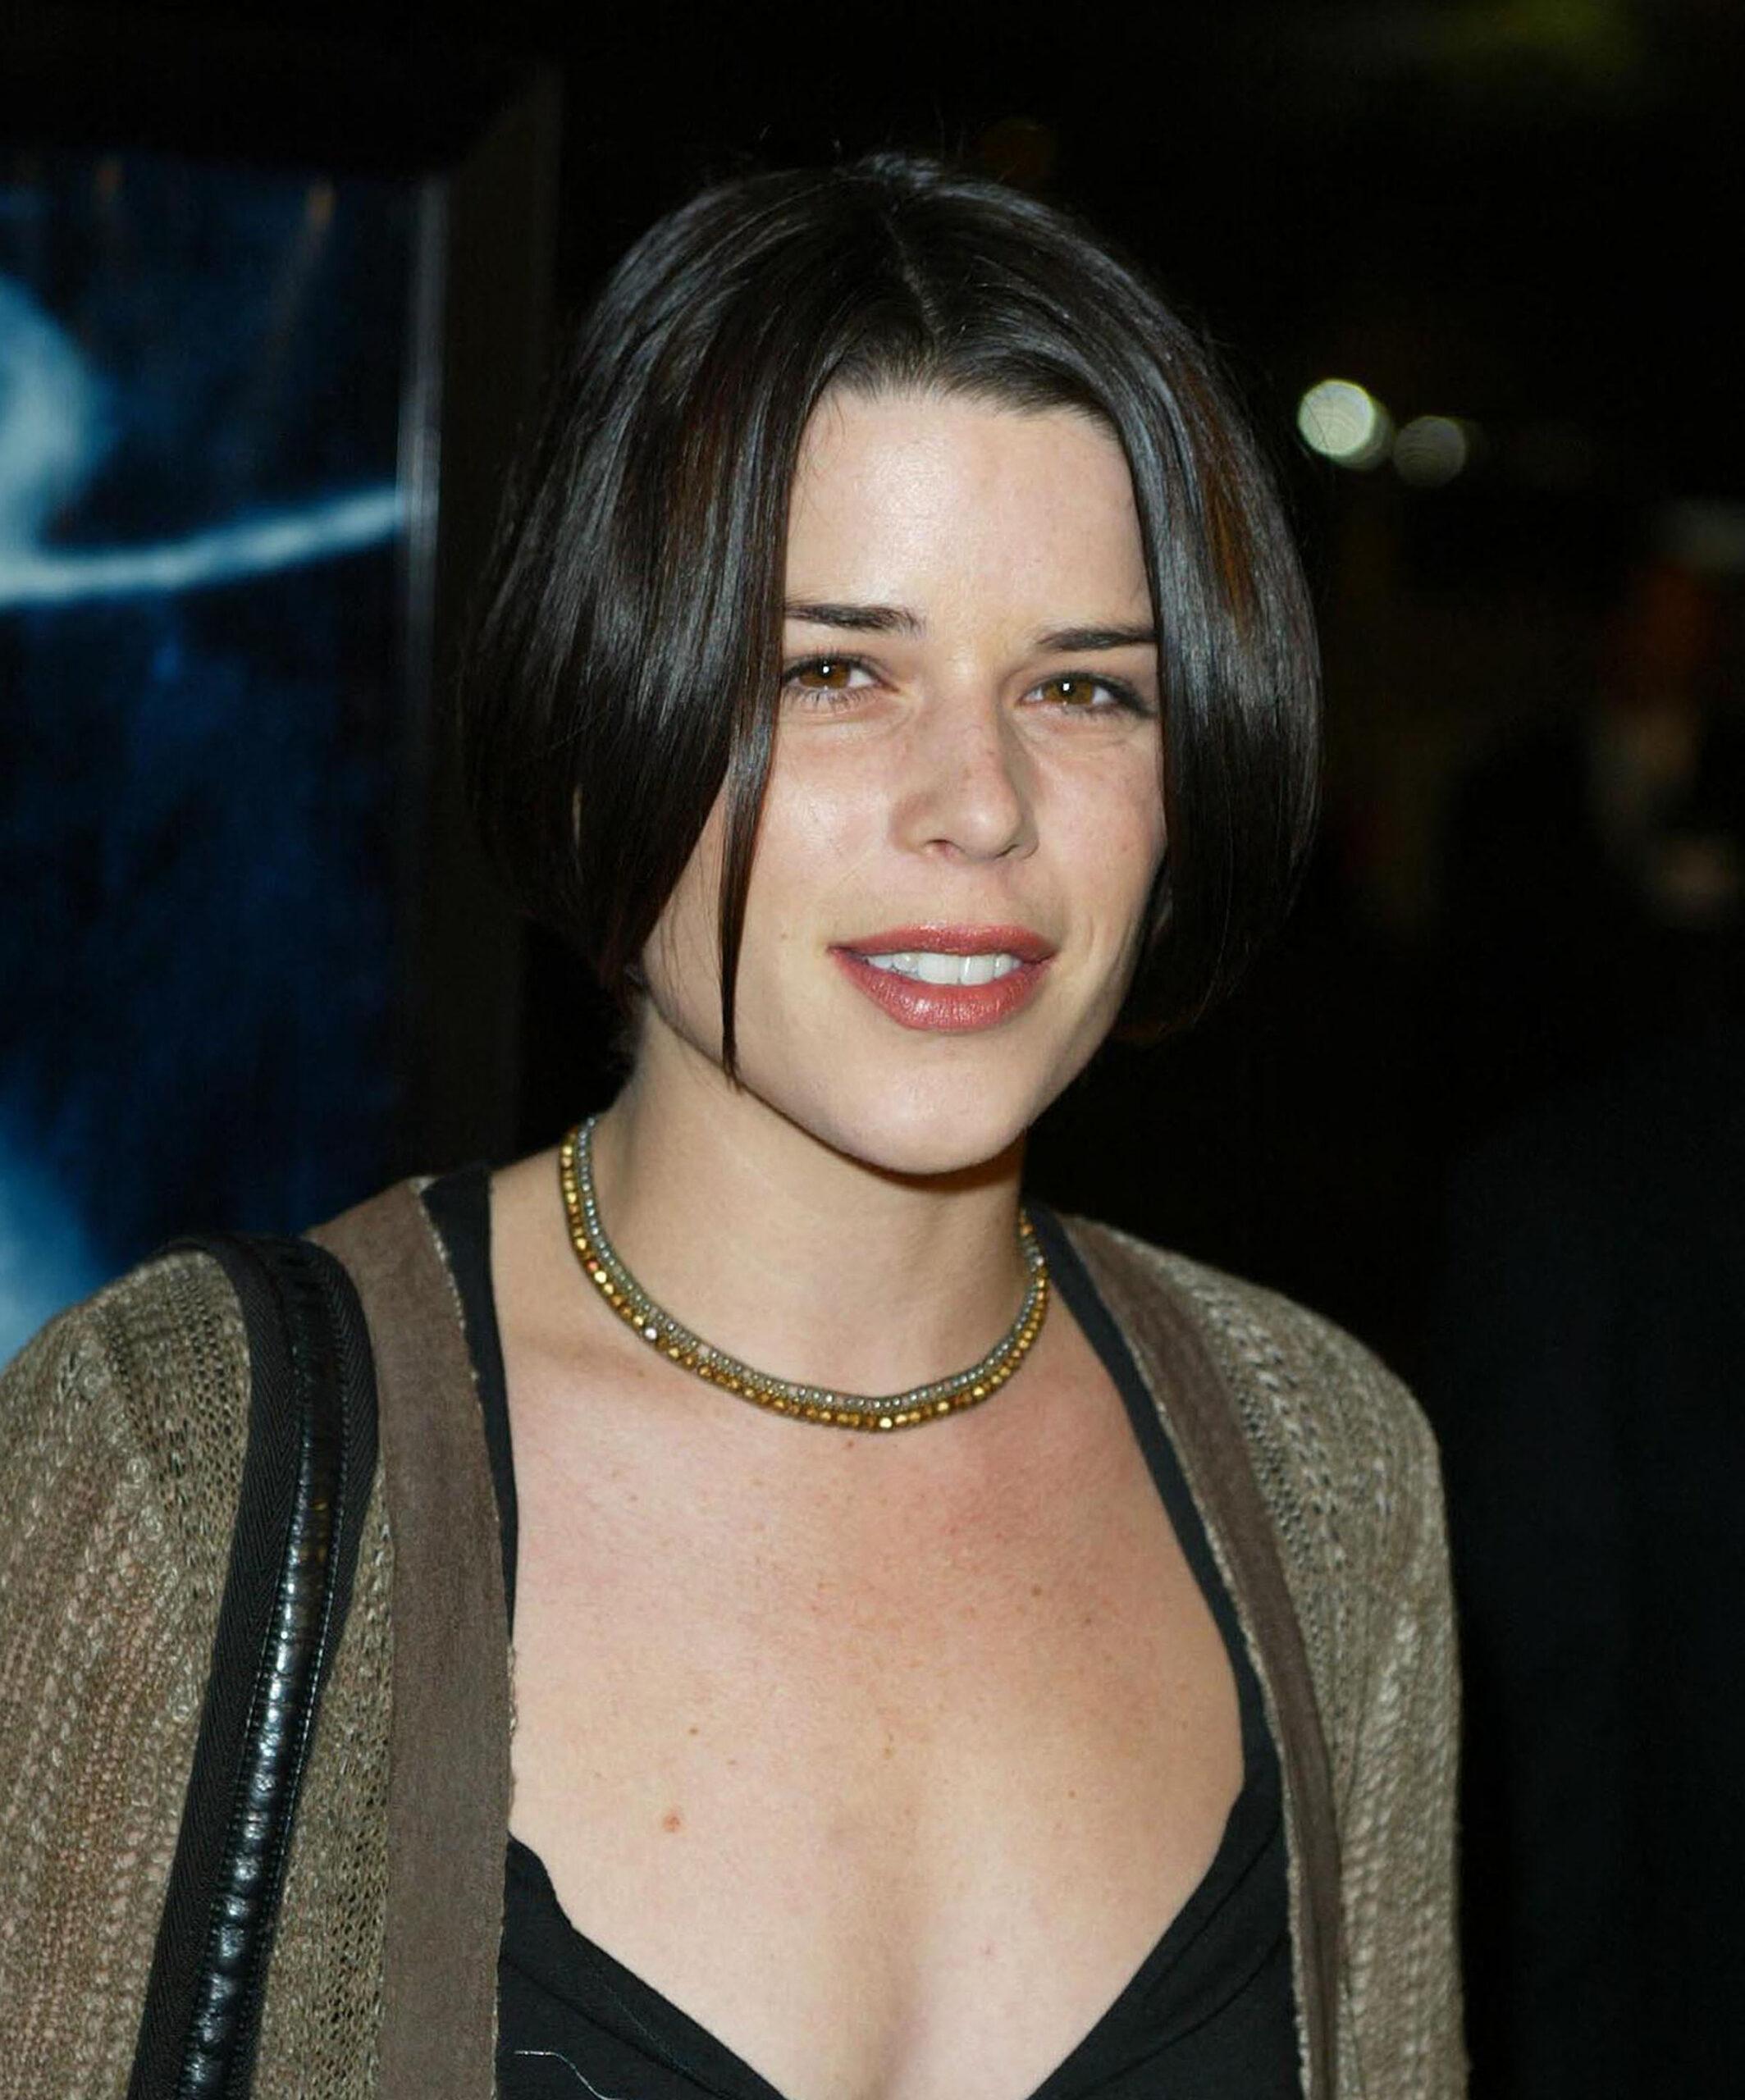 Neve Campbell Hints At Significant Pay Raise For 'Scream 7': 'The Studio Heard Me'